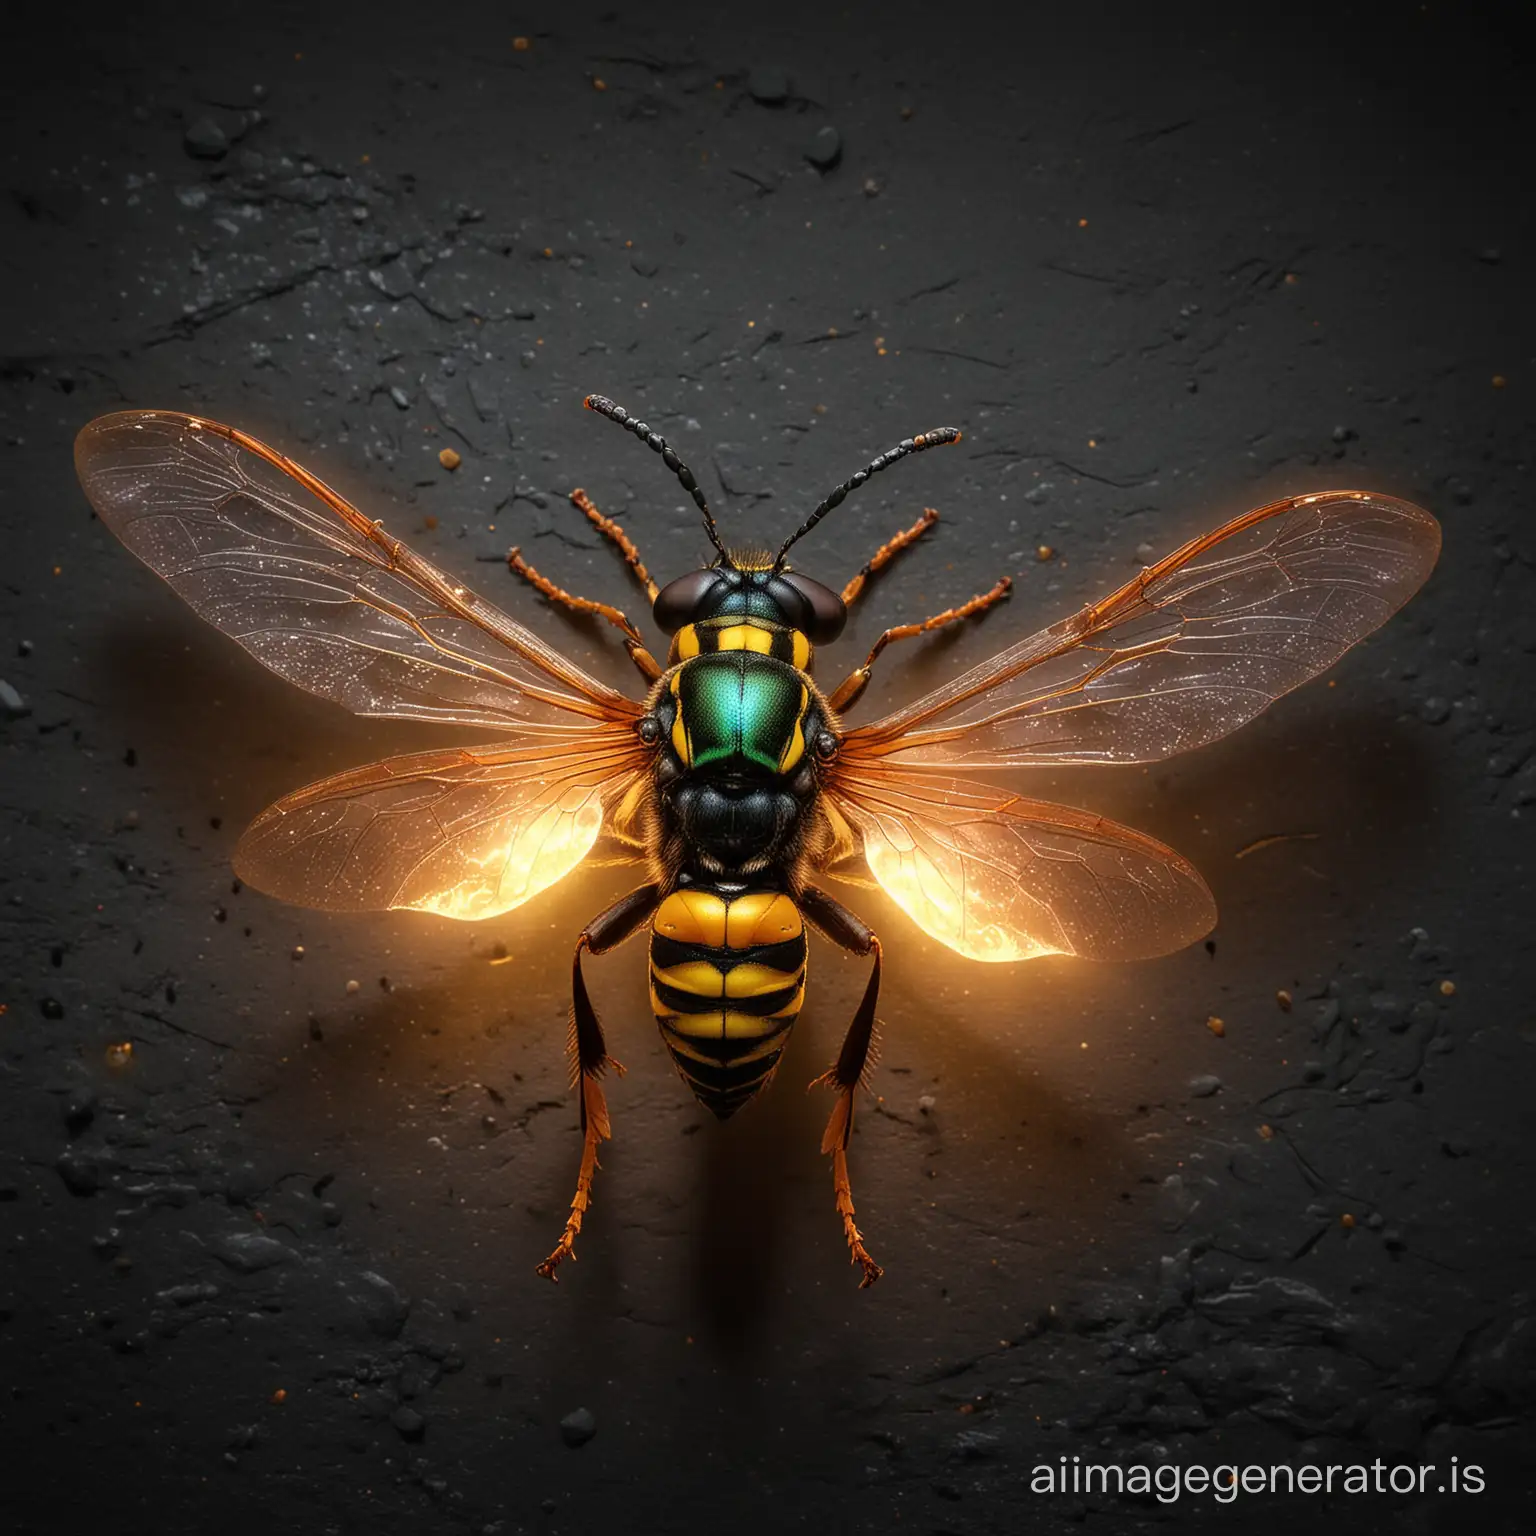 A stunning 3D render of a colorful wasp lying on a dark concrete flat ground with a fiery translucent glow emanating from its body, creating a mesmerizing spectacle. The insect appears to be a wasp with vibrant hues of green, orange, blue, yellow and red eyes. The close-up shot allows us to appreciate the intricate details of this fascinating creature while we can see the whole insect and it's wings, showcasing its shiny, bright and bioluminescent body. The lighting in the image enhances the luminosity of wasp, creating a striking contrast against the black background. This captivating scene is reminiscent of a magical and mystical creature from a fantasy realm.